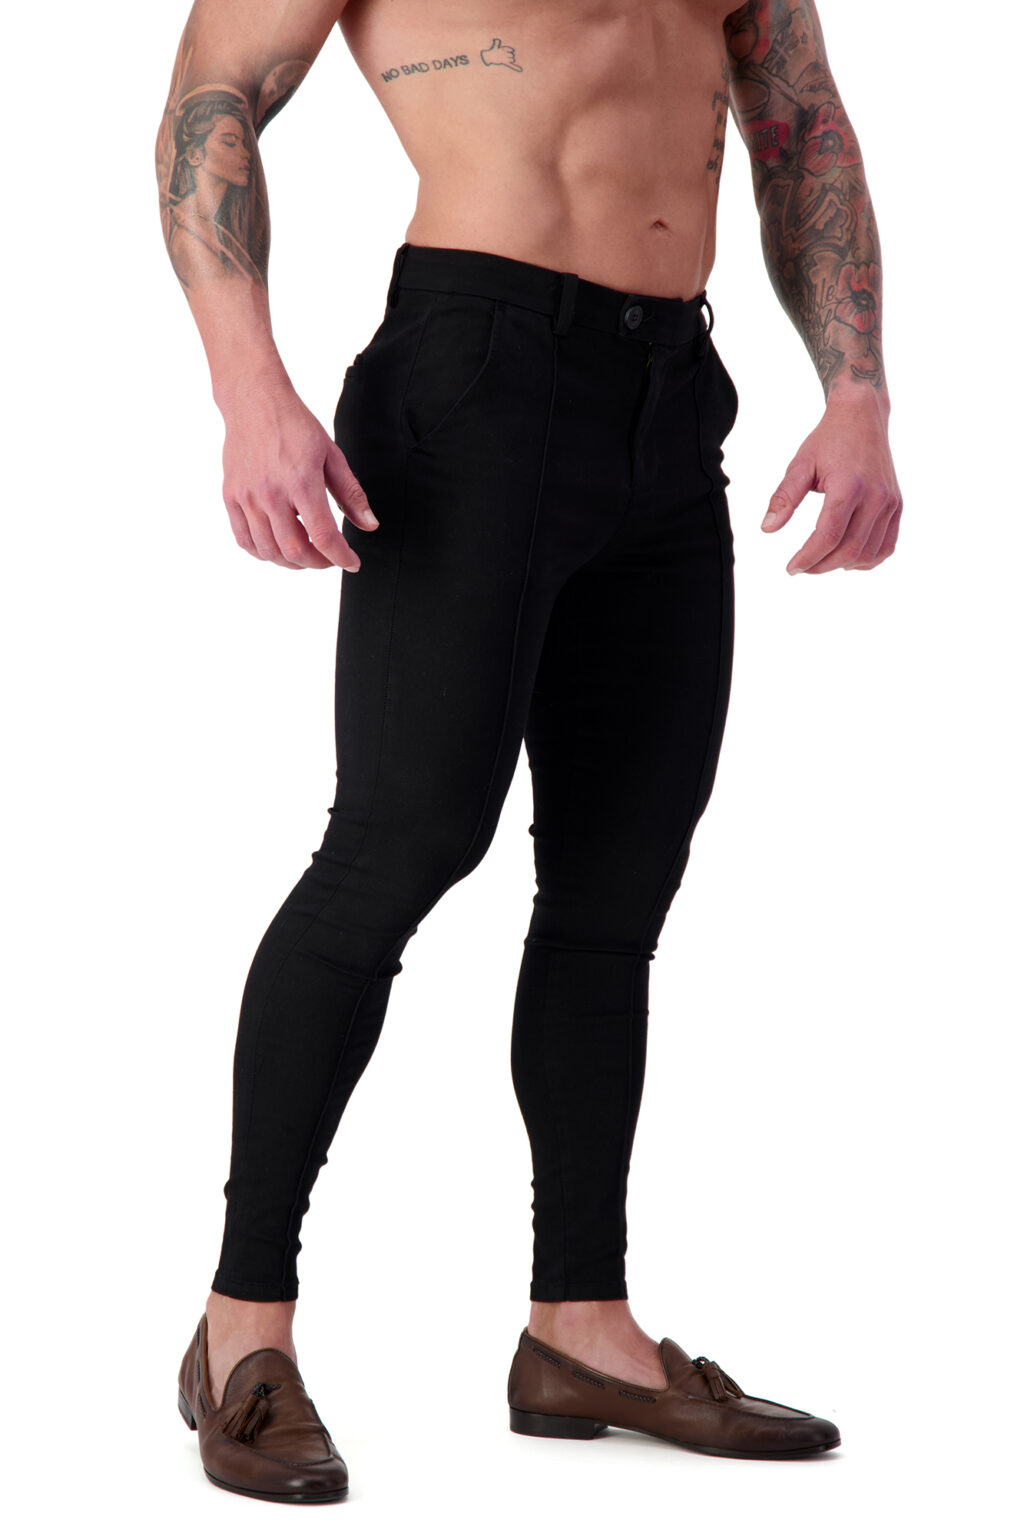 AG17 Muscle Fit Trousers - Black/Pintuck | Adonis Gear